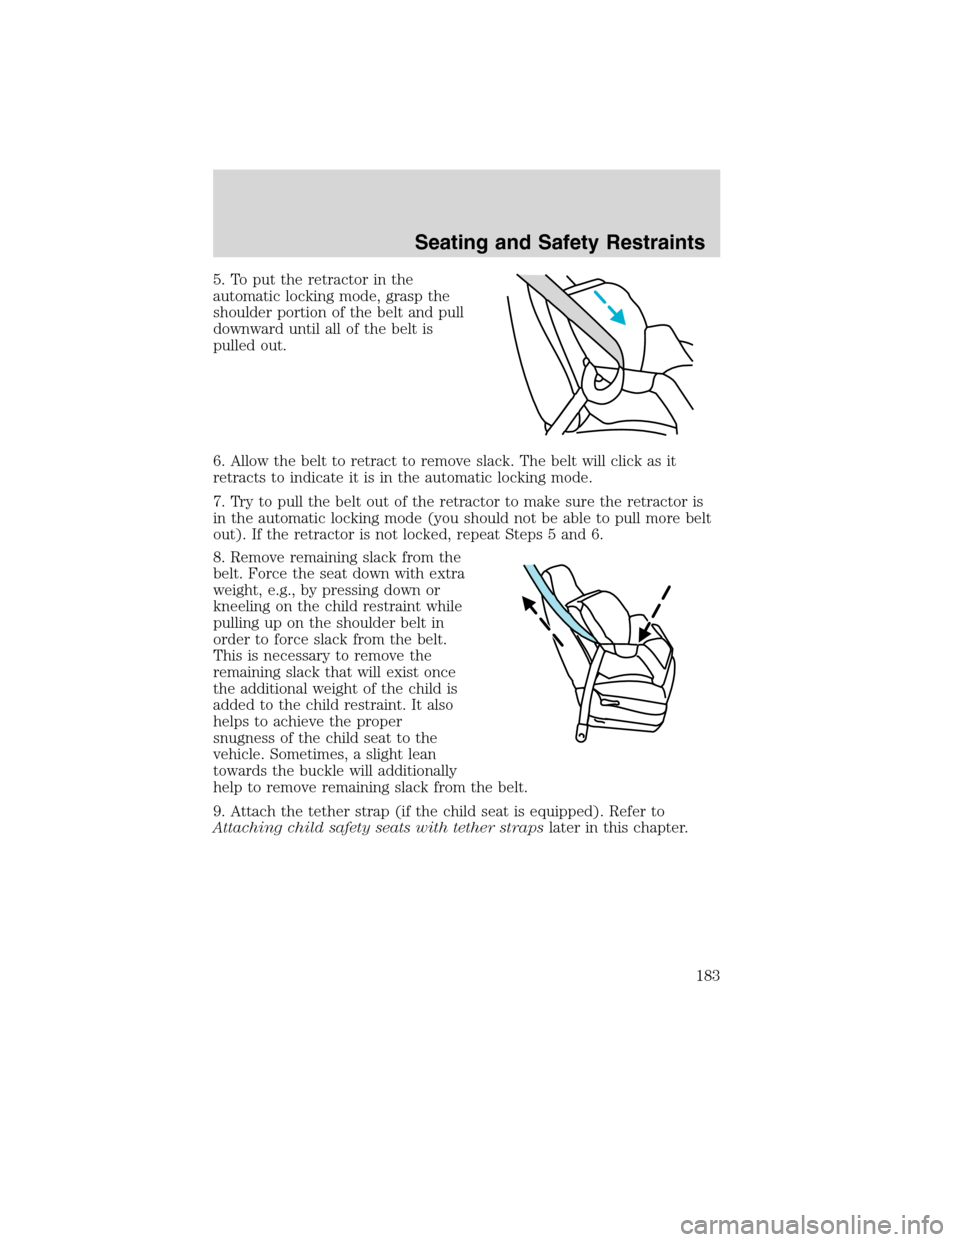 LINCOLN MKS 2010 Owners Manual 5. To put the retractor in the
automatic locking mode, grasp the
shoulder portion of the belt and pull
downward until all of the belt is
pulled out.
6. Allow the belt to retract to remove slack. The b